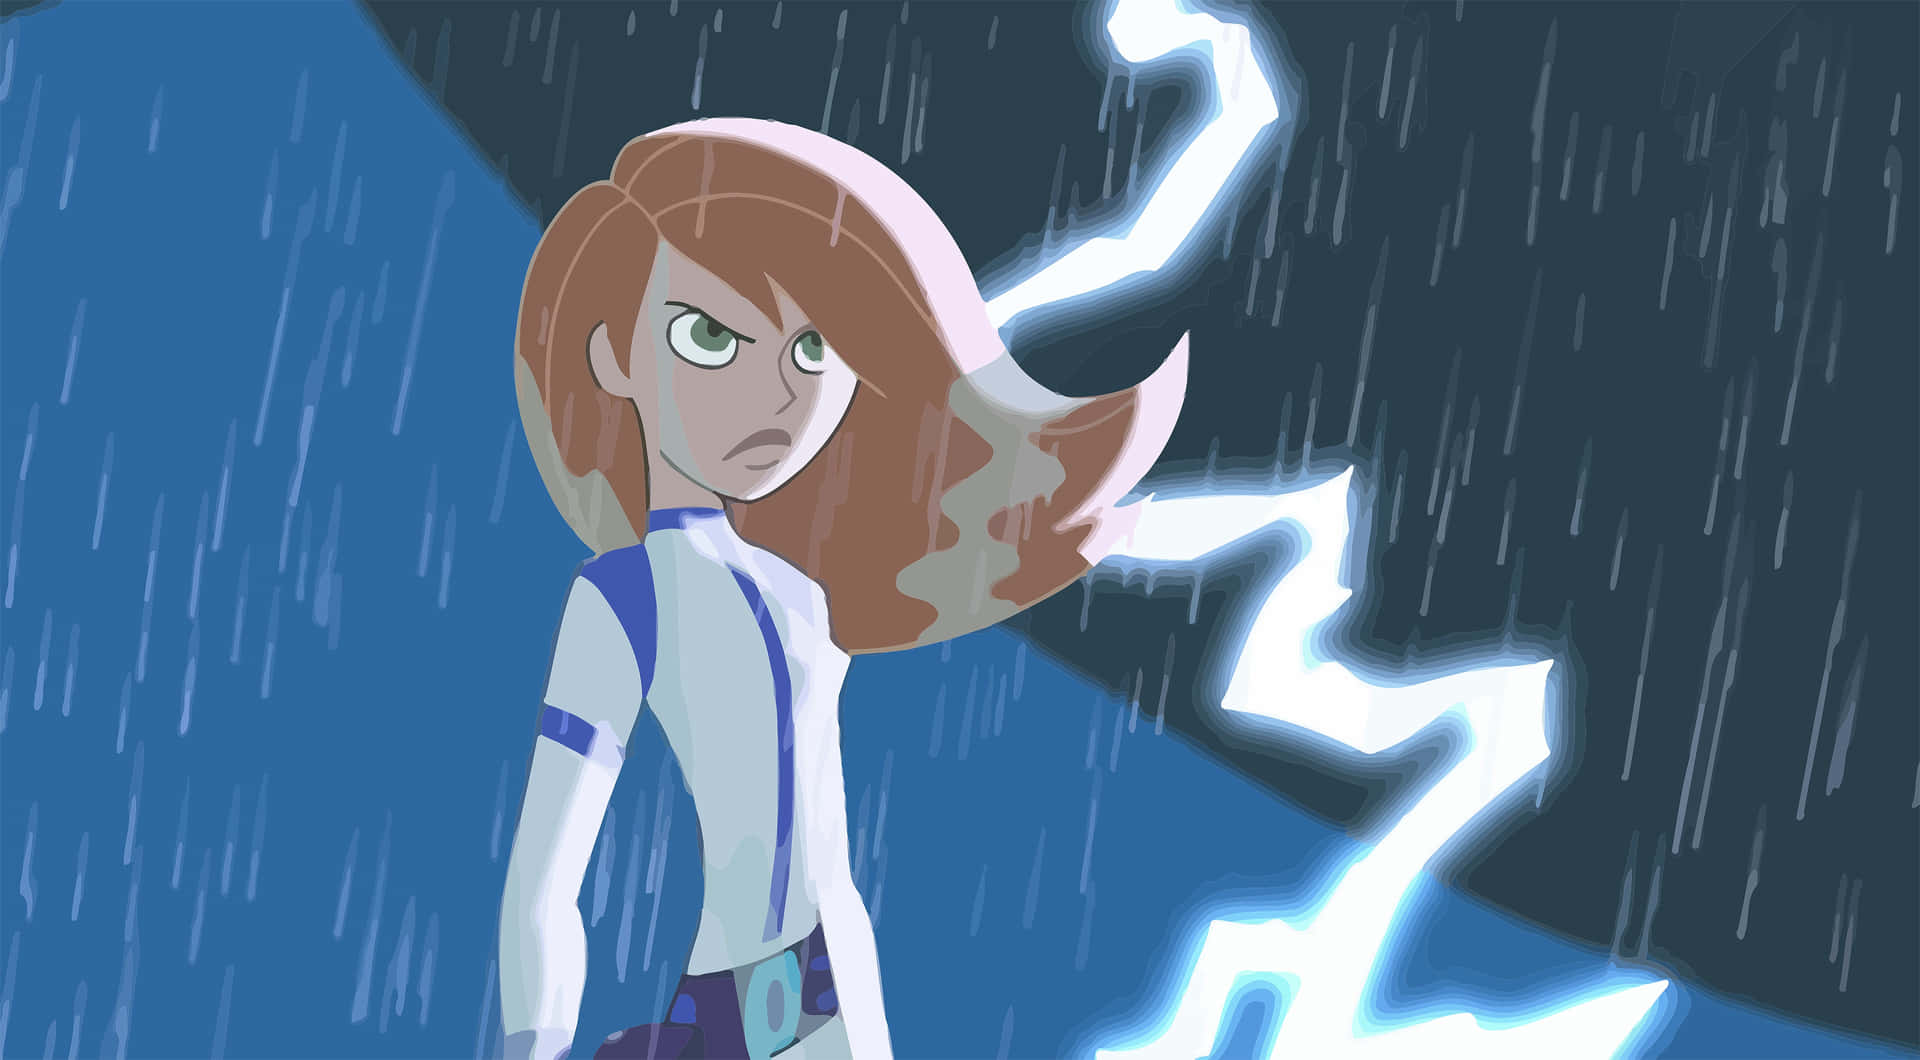 Kim Possible in action pose with a determined expression Wallpaper